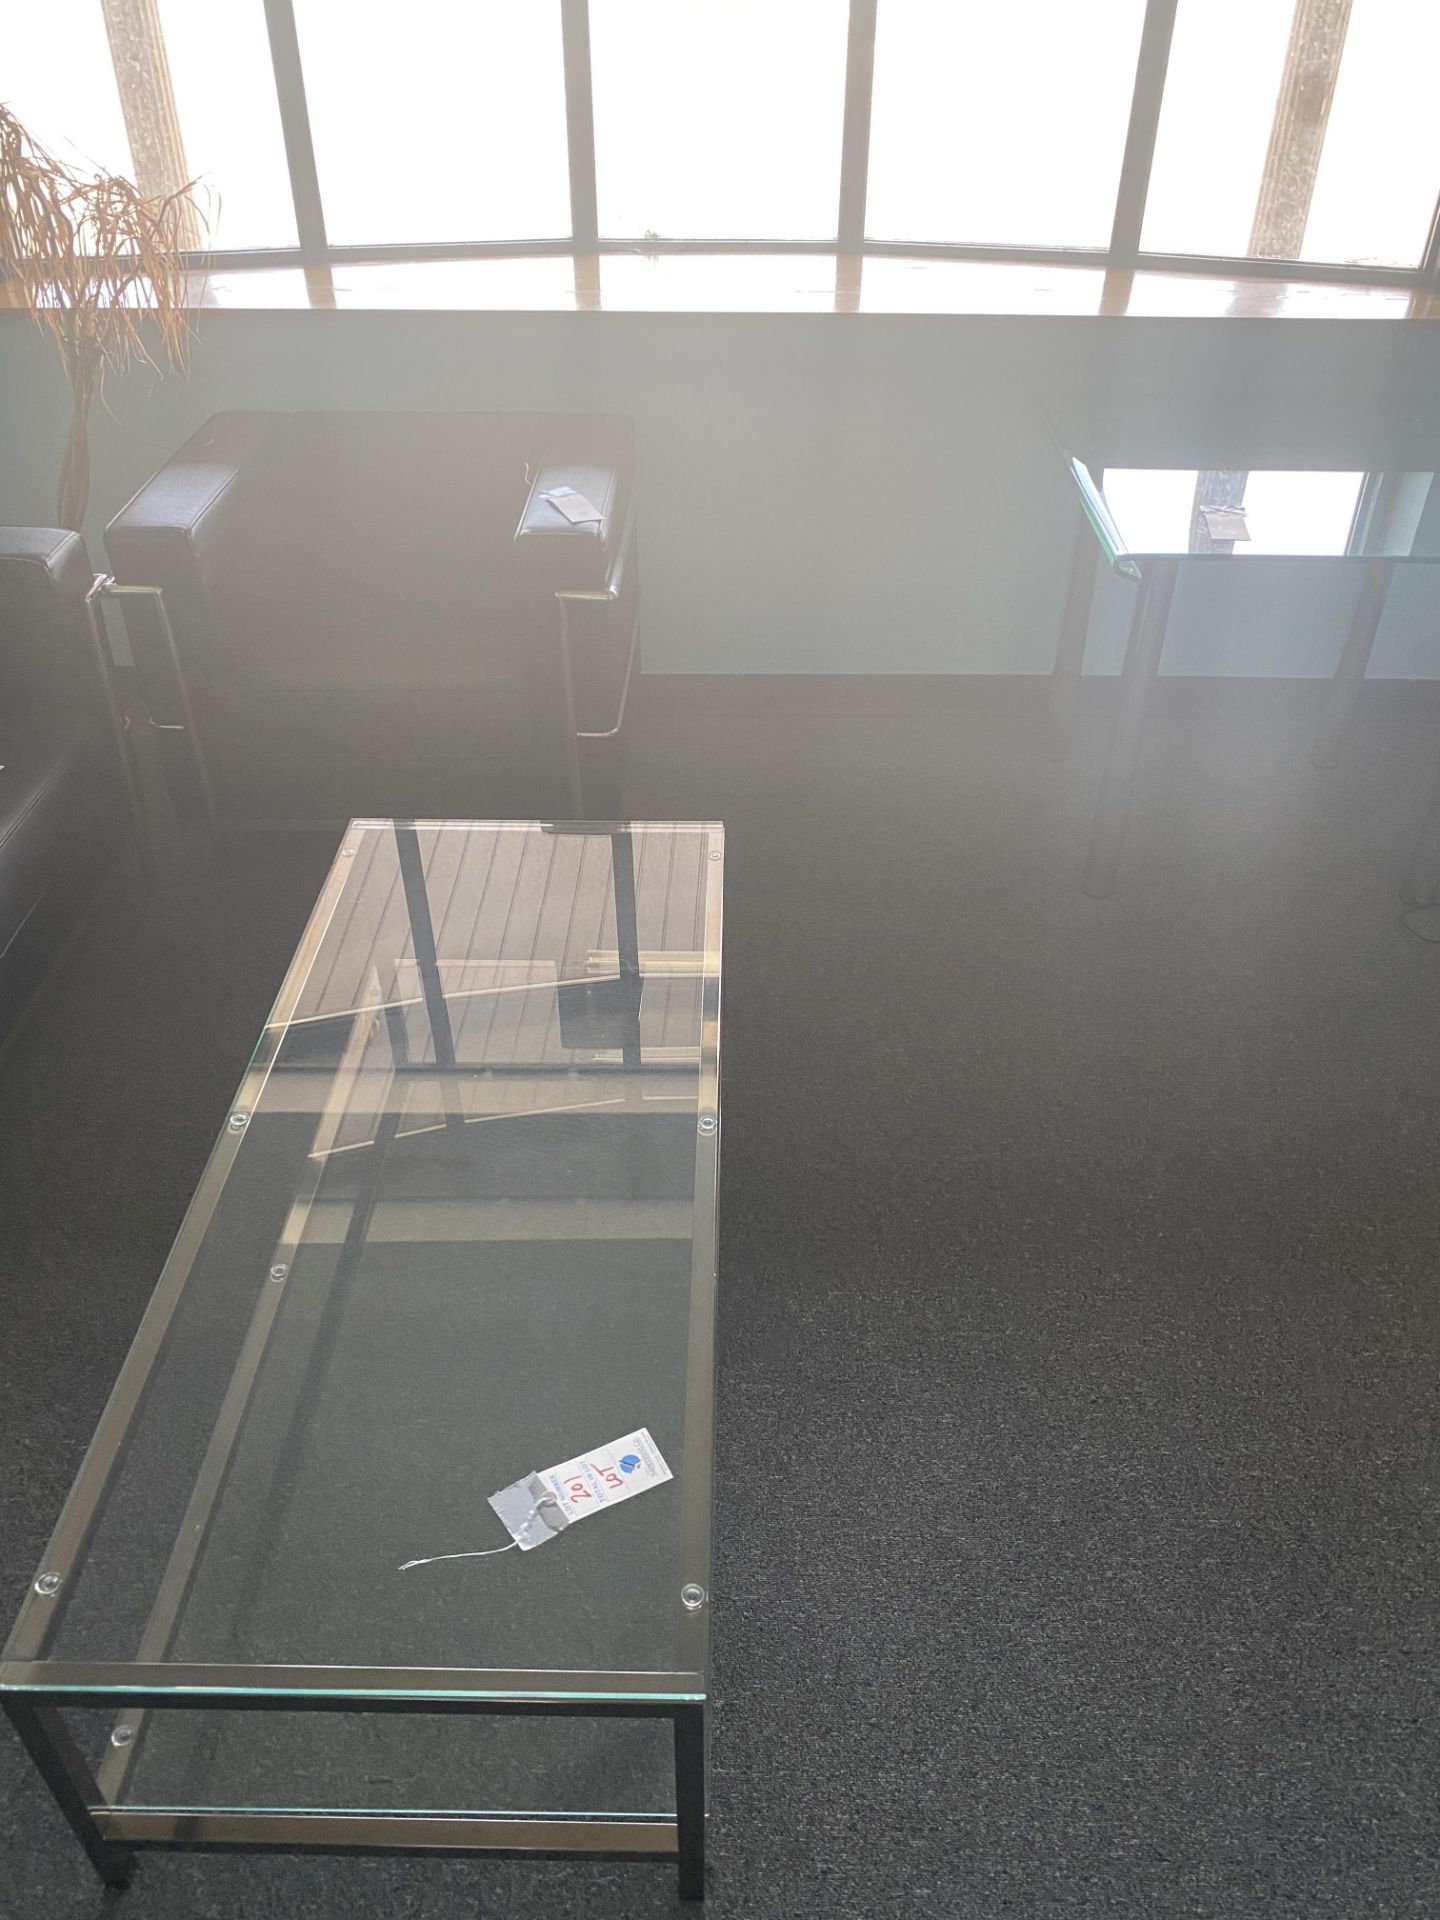 (Lot) Couch, Chair & Glass Tables - Image 2 of 4